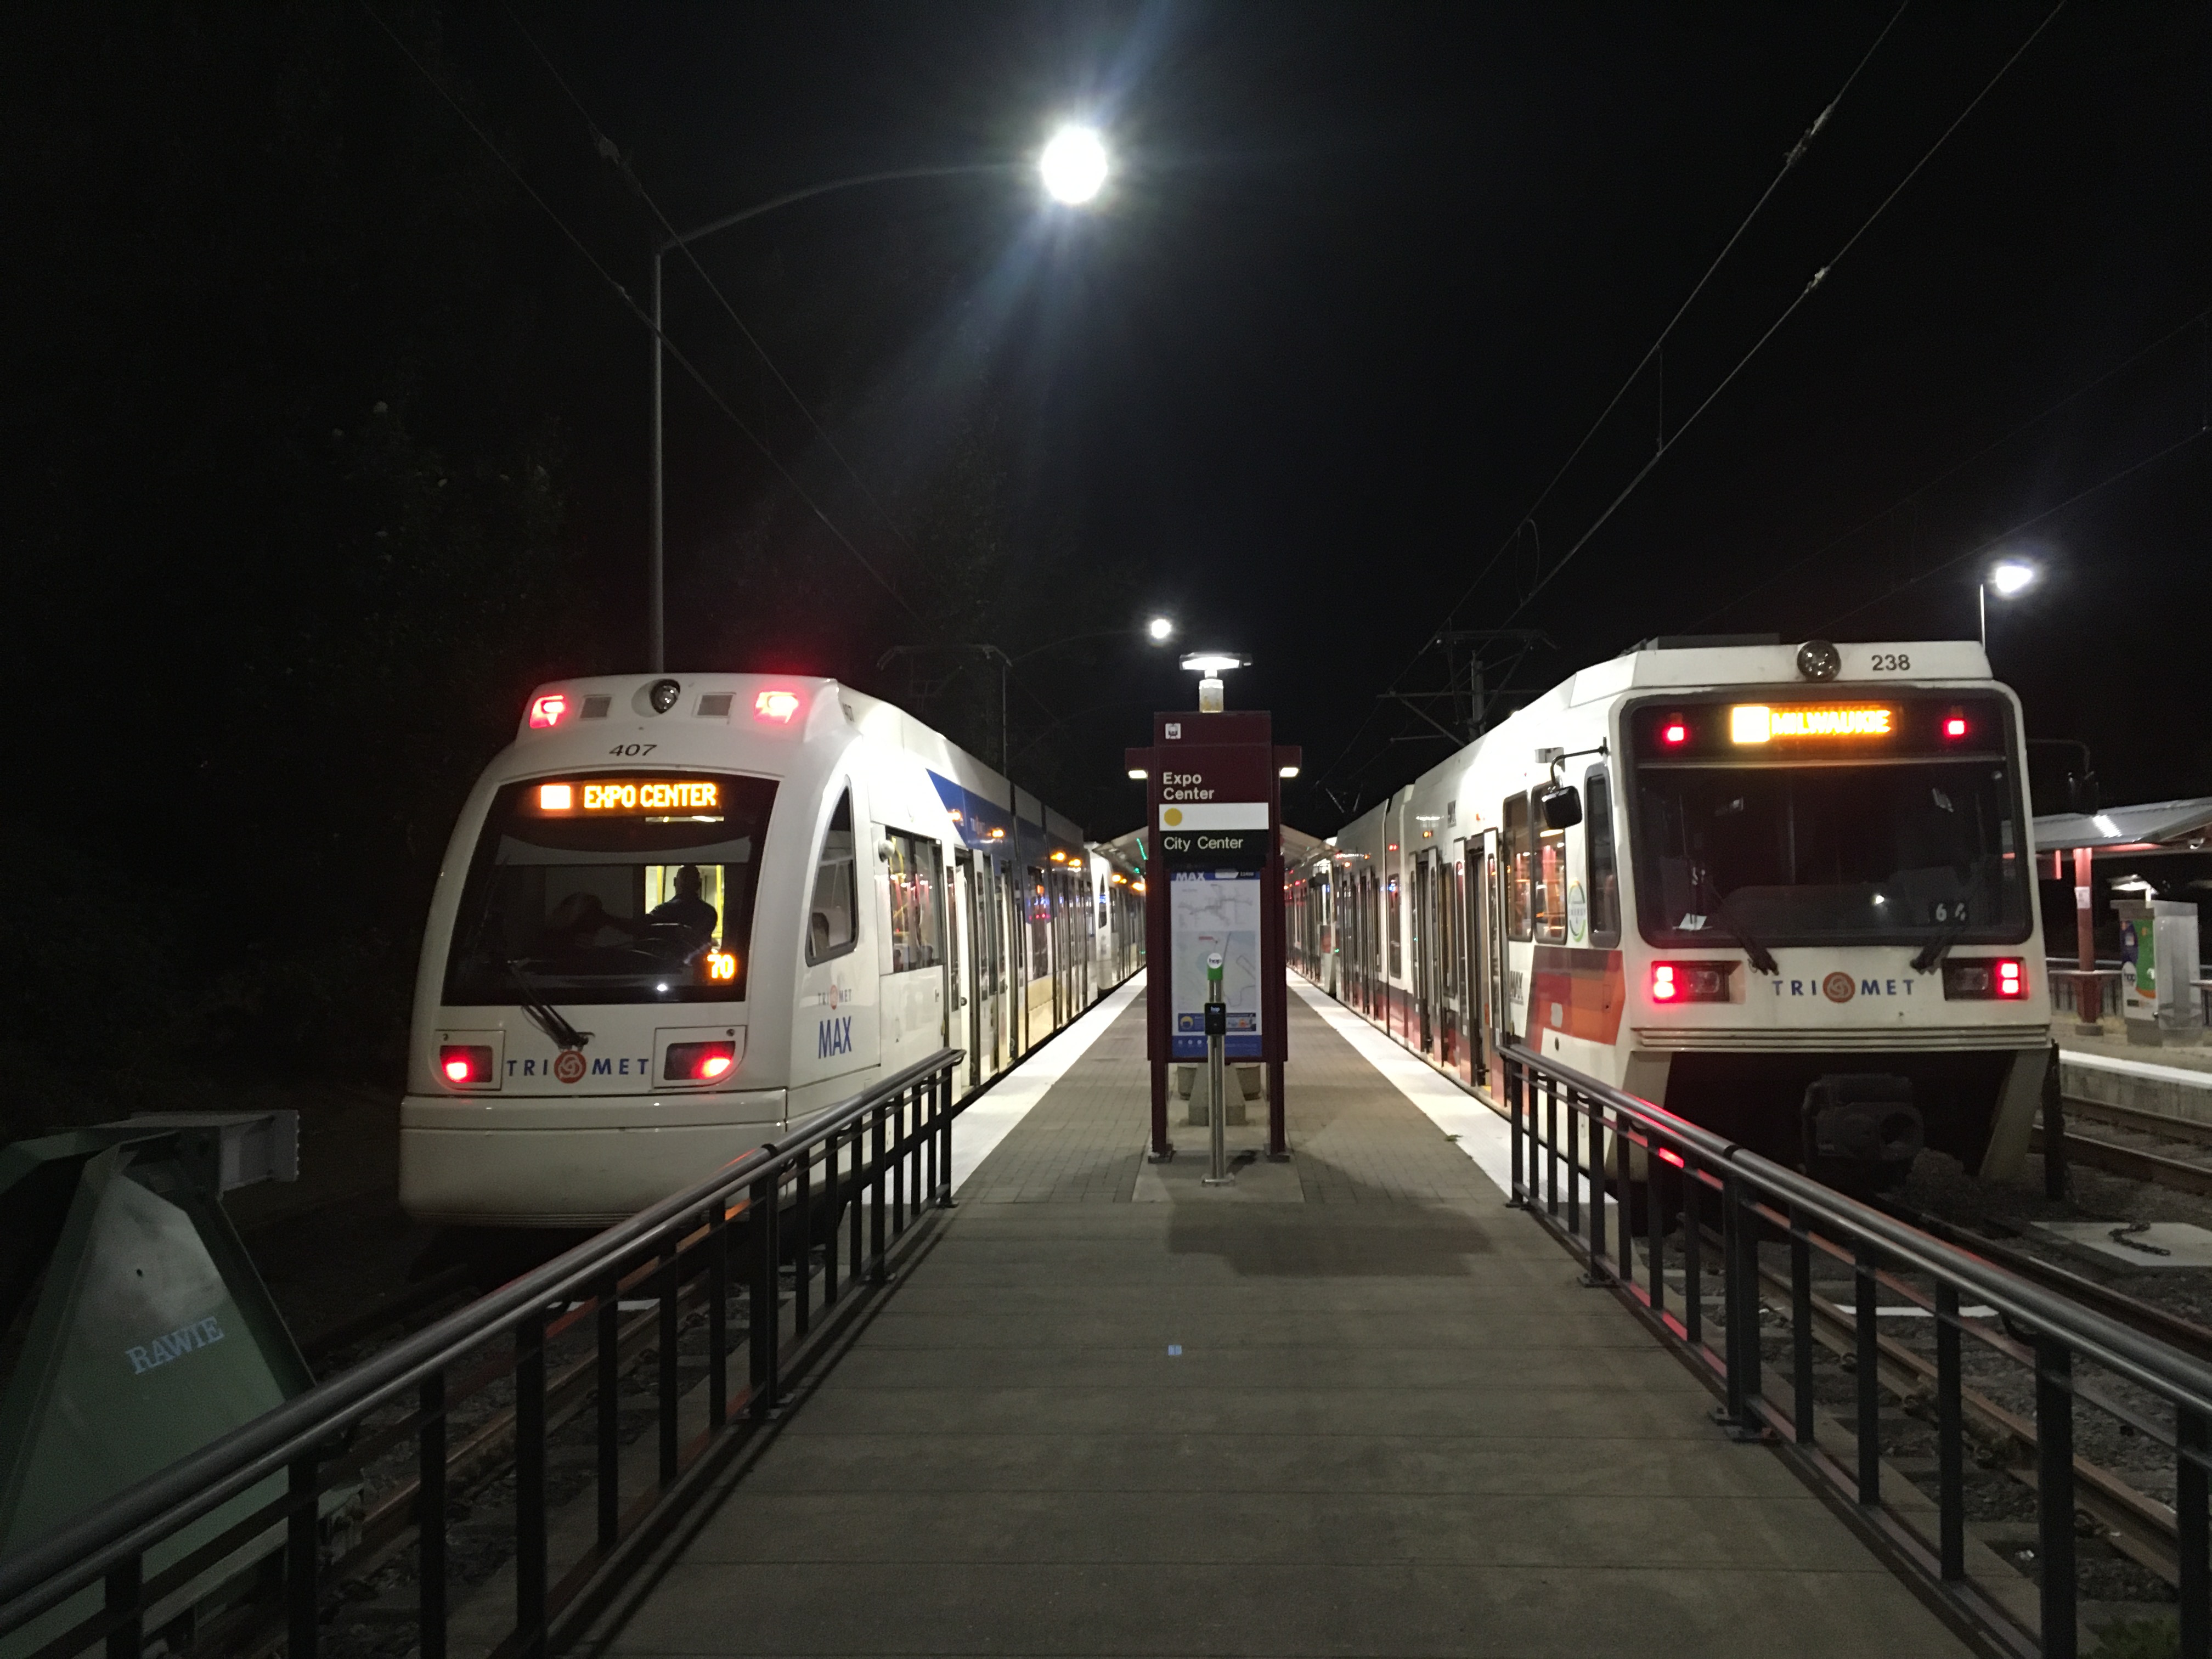 Night-time view of a light rail station, with a newer, sleeker train on the left and and older, boxier train on the right